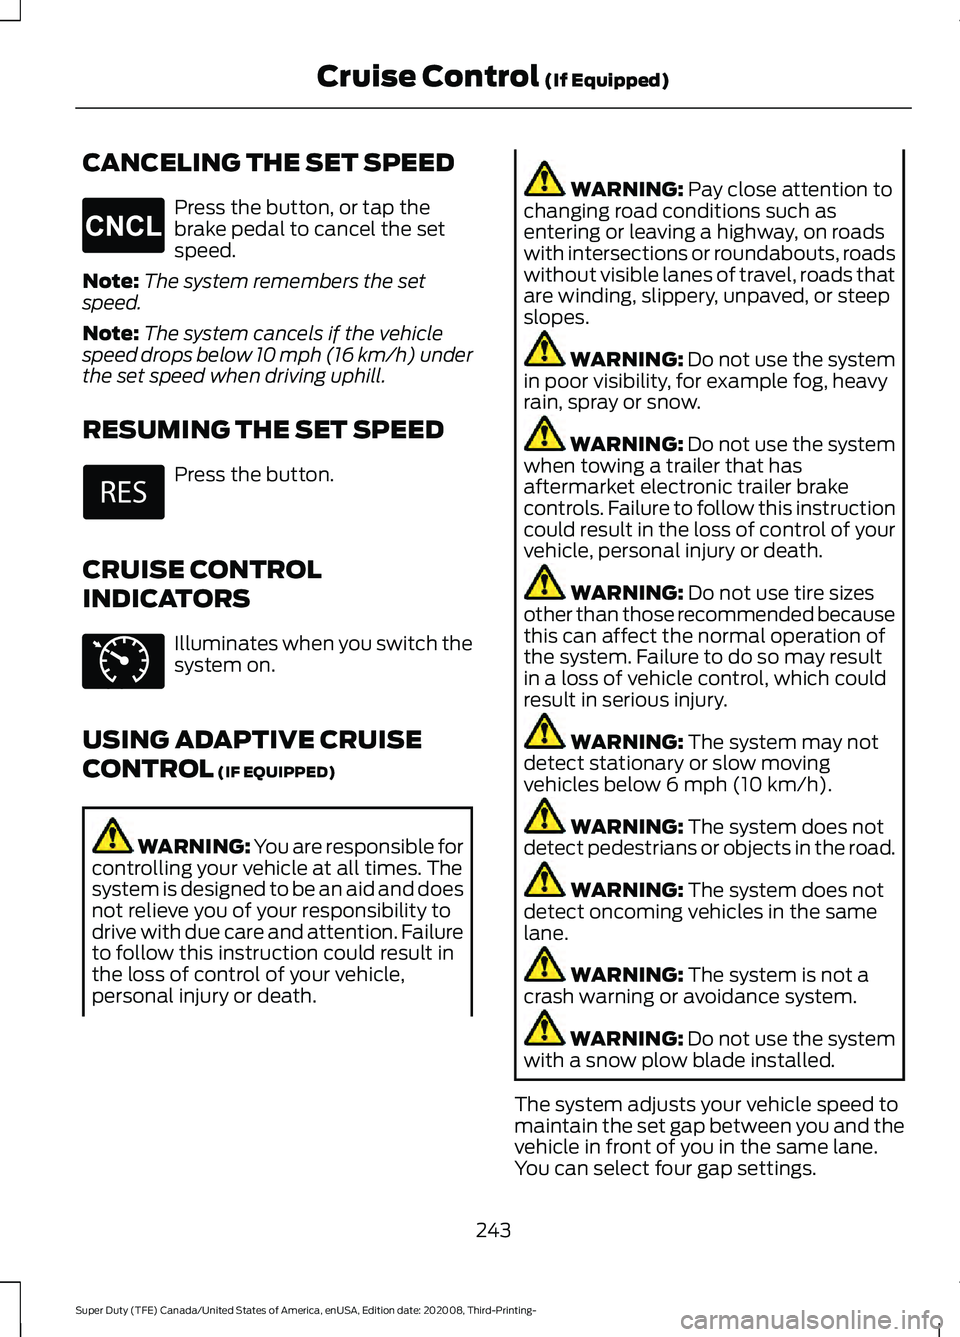 FORD F-450 2021 Owners Guide CANCELING THE SET SPEED
Press the button, or tap the
brake pedal to cancel the set
speed.
Note: The system remembers the set
speed.
Note: The system cancels if the vehicle
speed drops below 10 mph (16